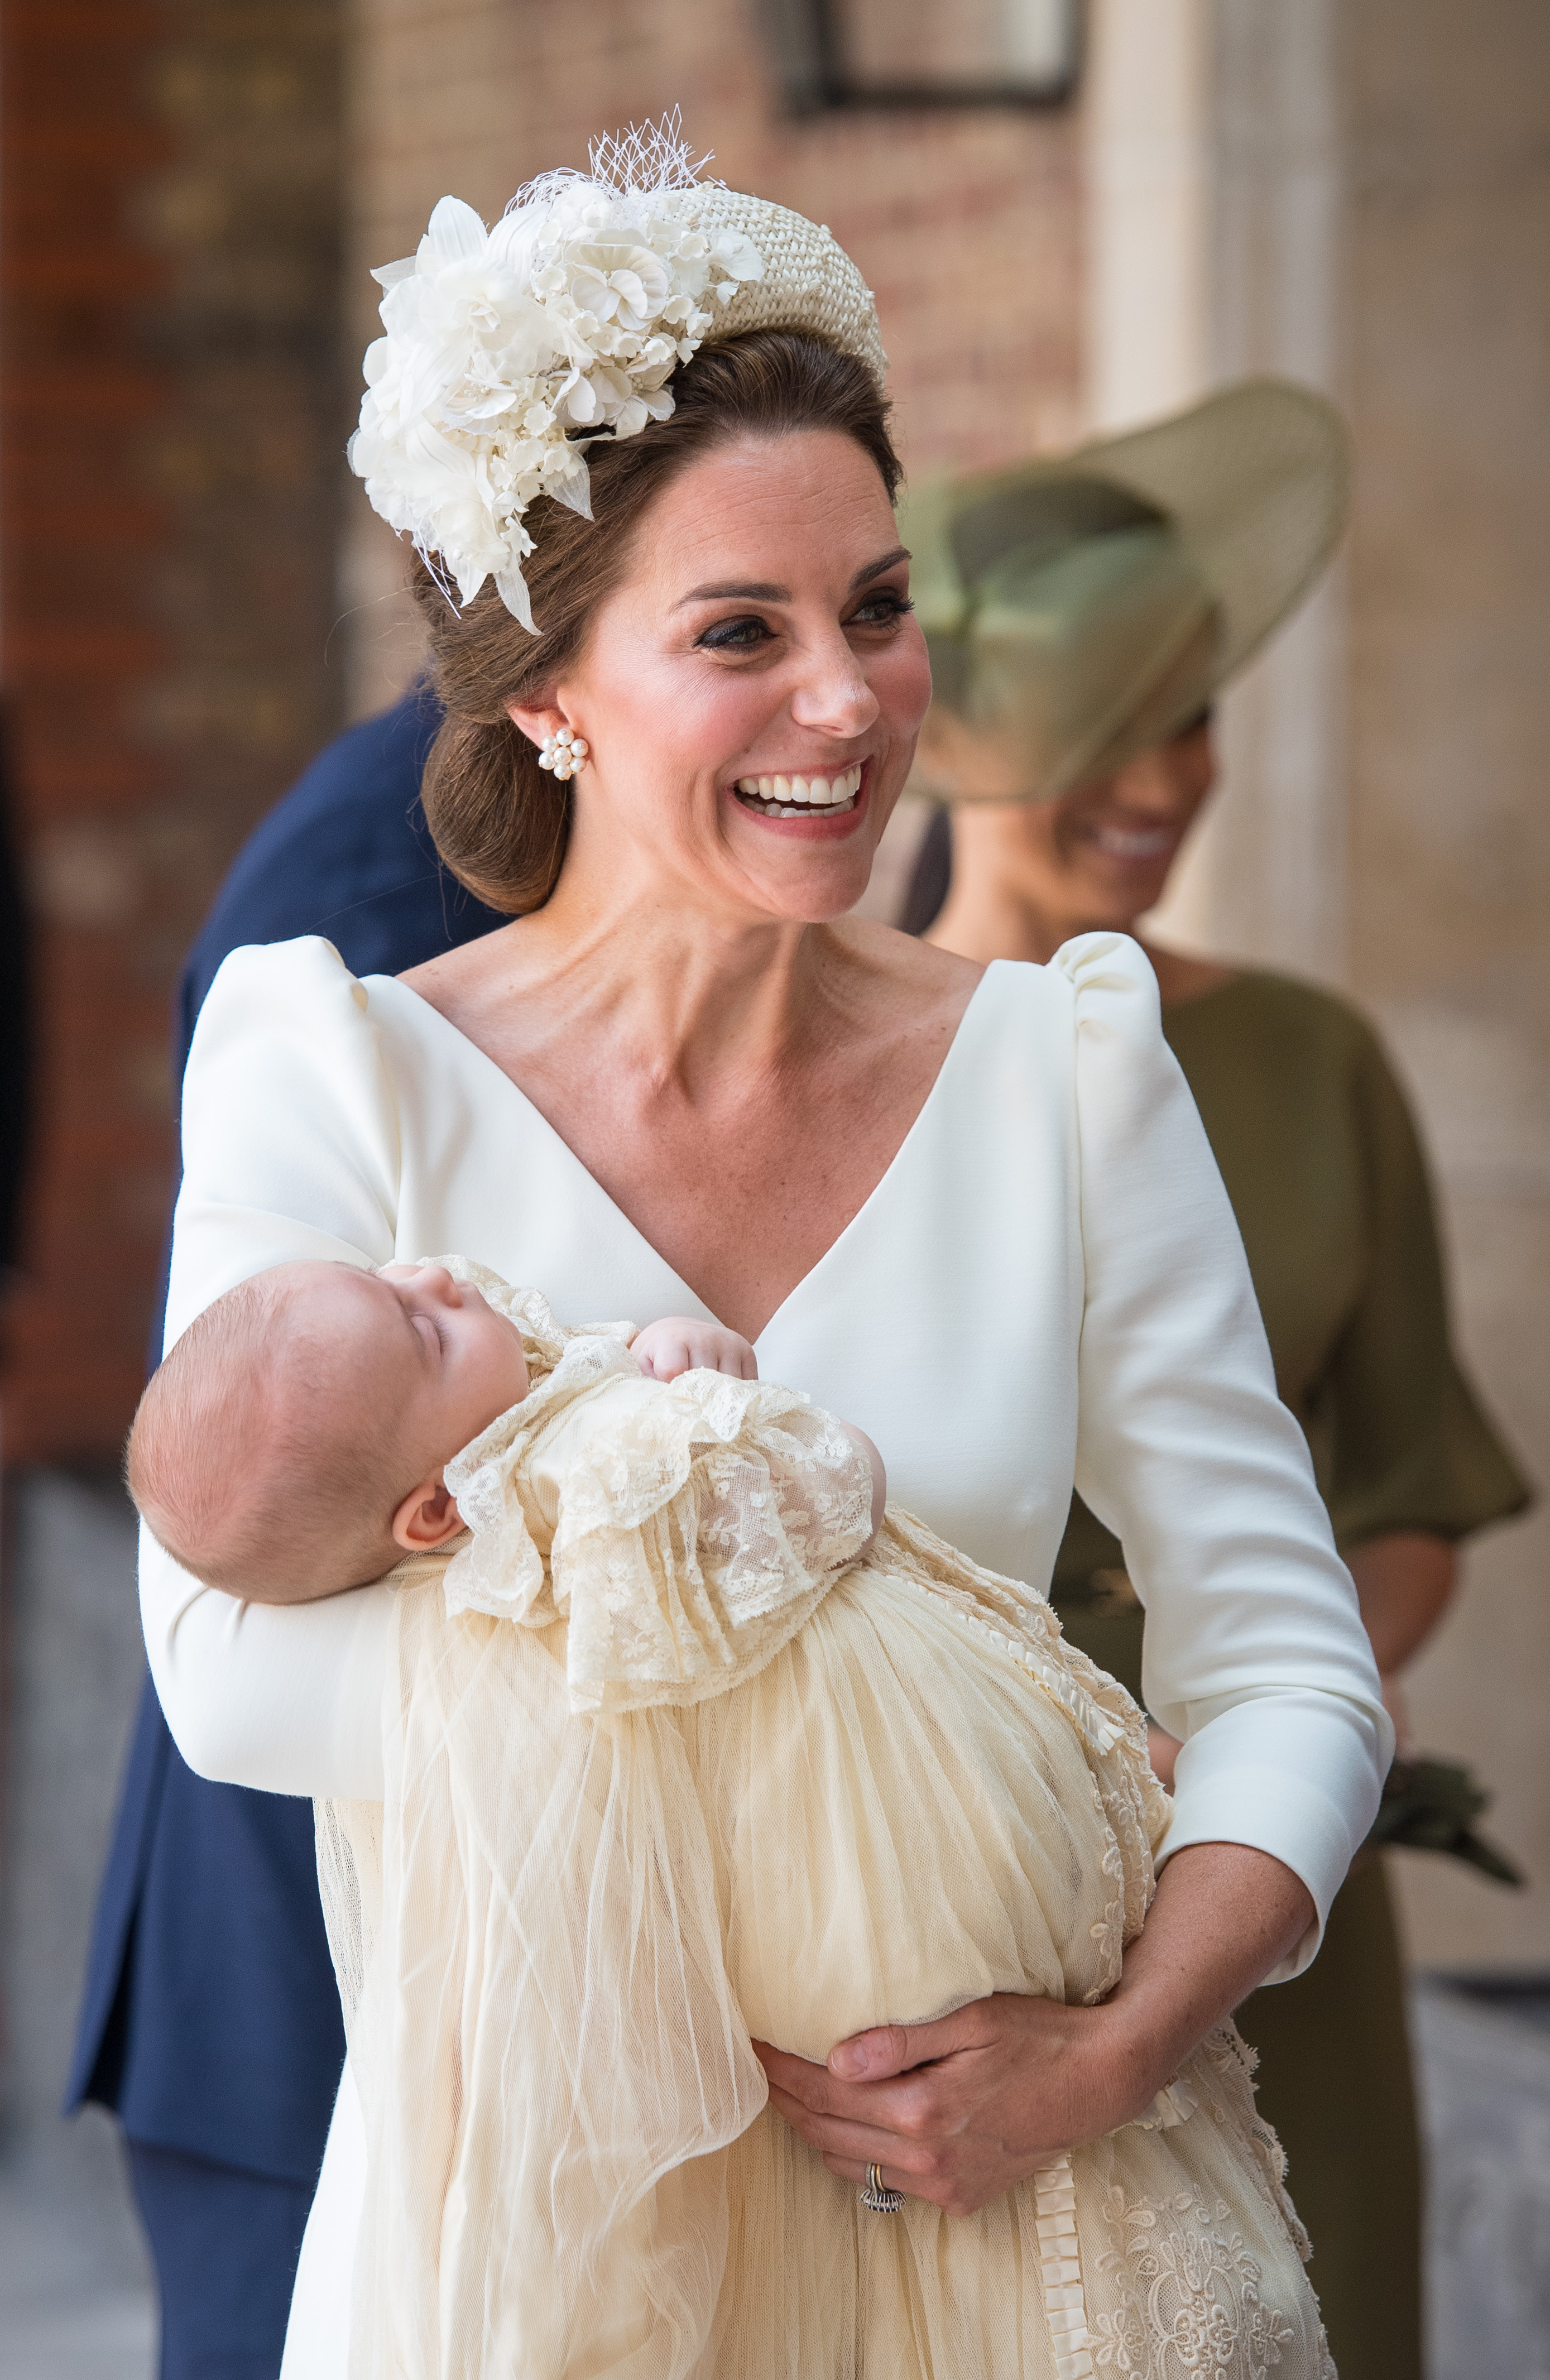 LONDON, ENGLAND - JULY 09: Catherine, Duchess of Cambridge carries Prince Louis as they arrive for his christening service at St James's Palace on July 09, 2018 in London, England. (Photo by Dominic Lipinski - WPA Pool/Getty Images)